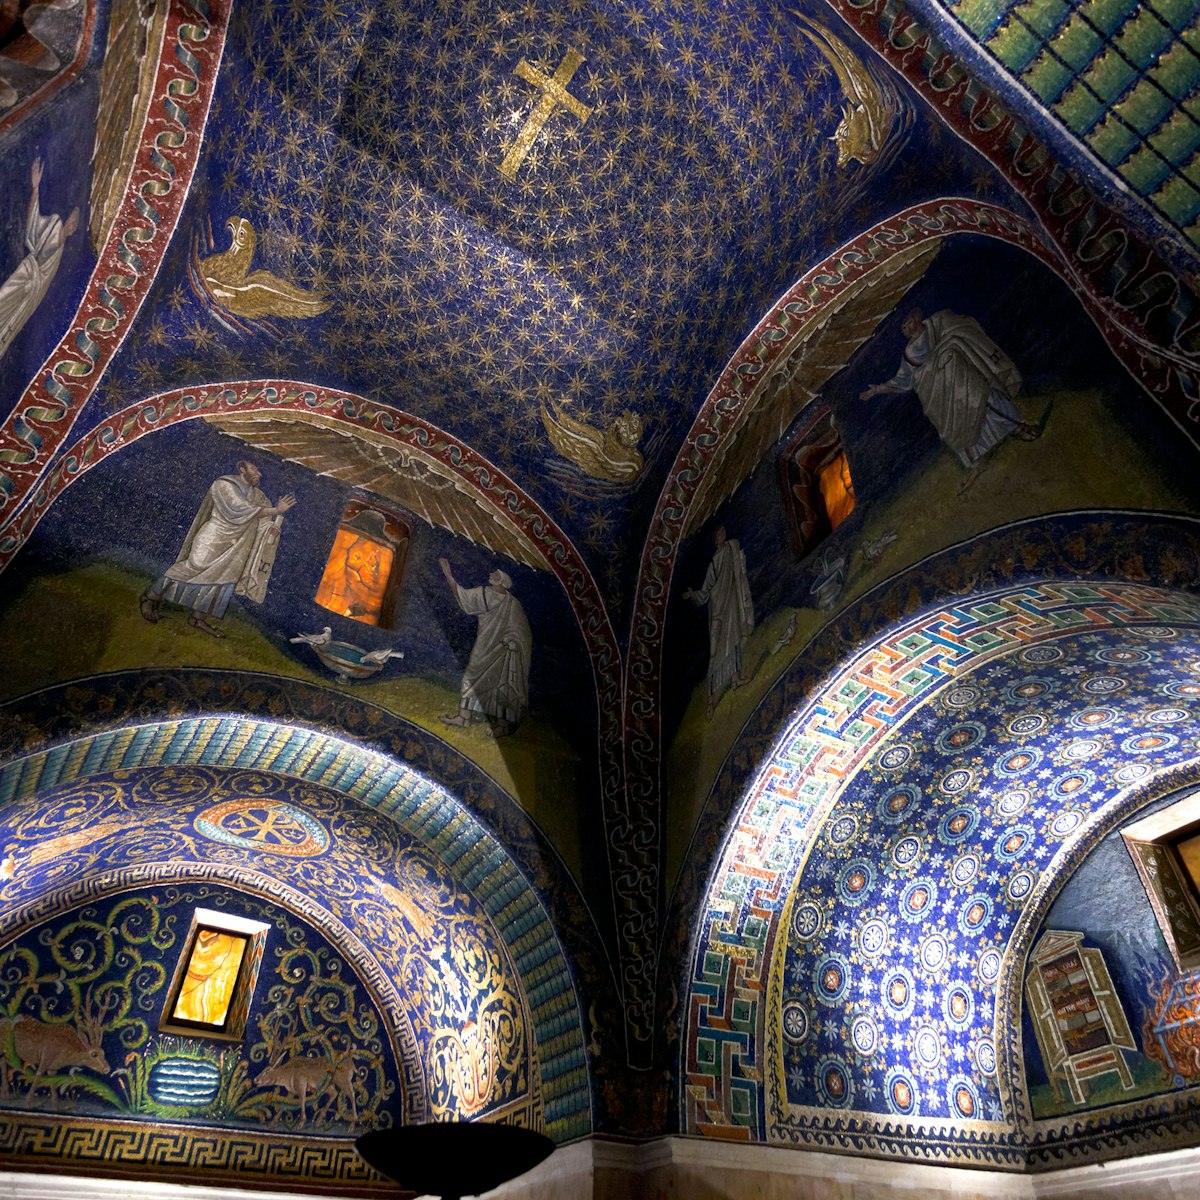 dark blue Ceiling Mosaic of the galla placidia mausoleum. Built between 425 and 433, this small mausoleum adopts a cruciform plan, in Ravenna, Italy on November 4, 2012